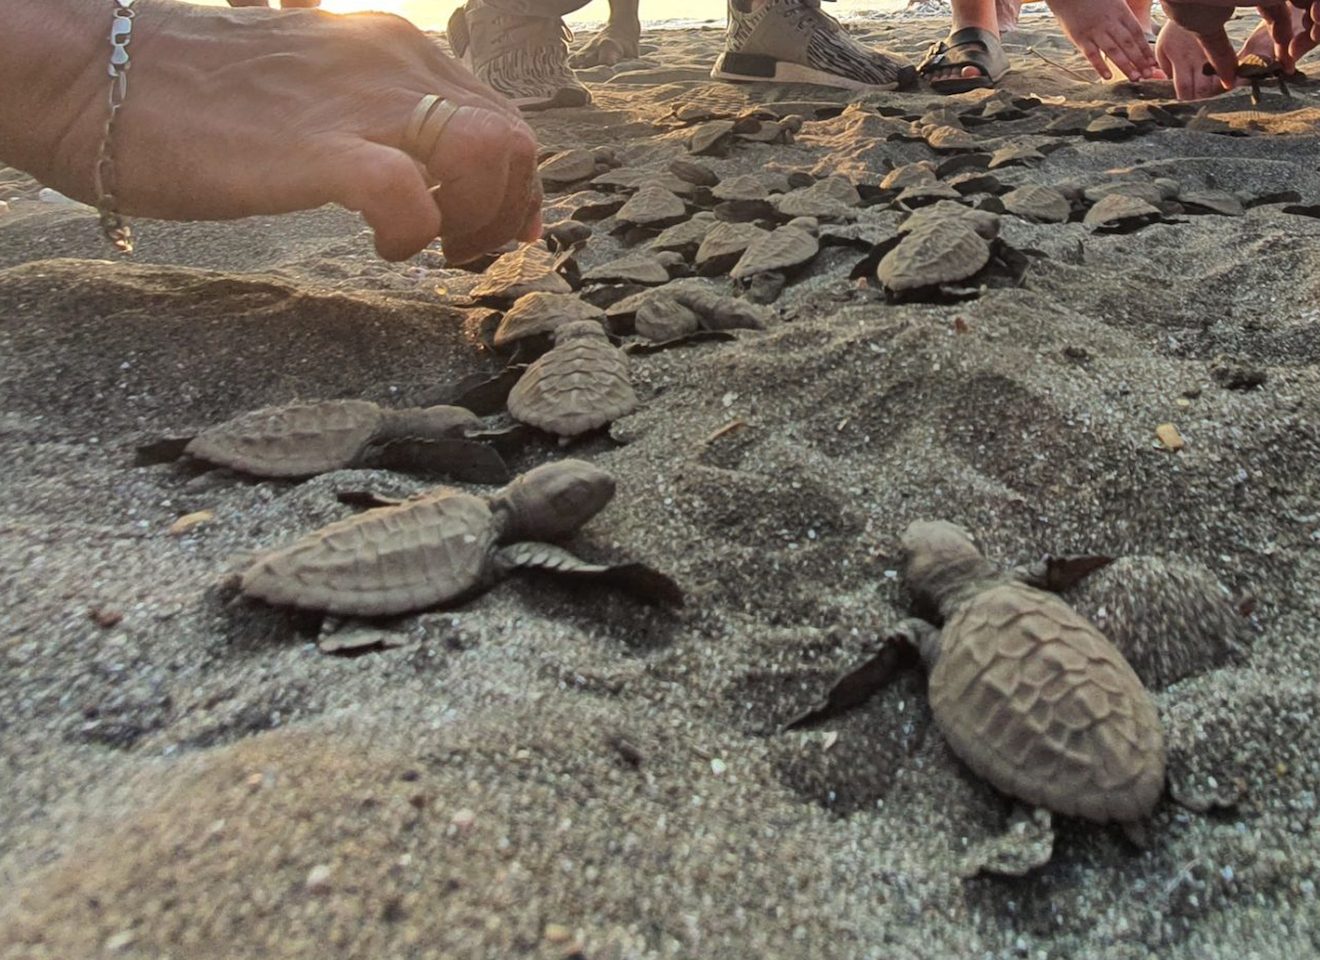 Olive ridley sea turtles hatchlings released in Naic